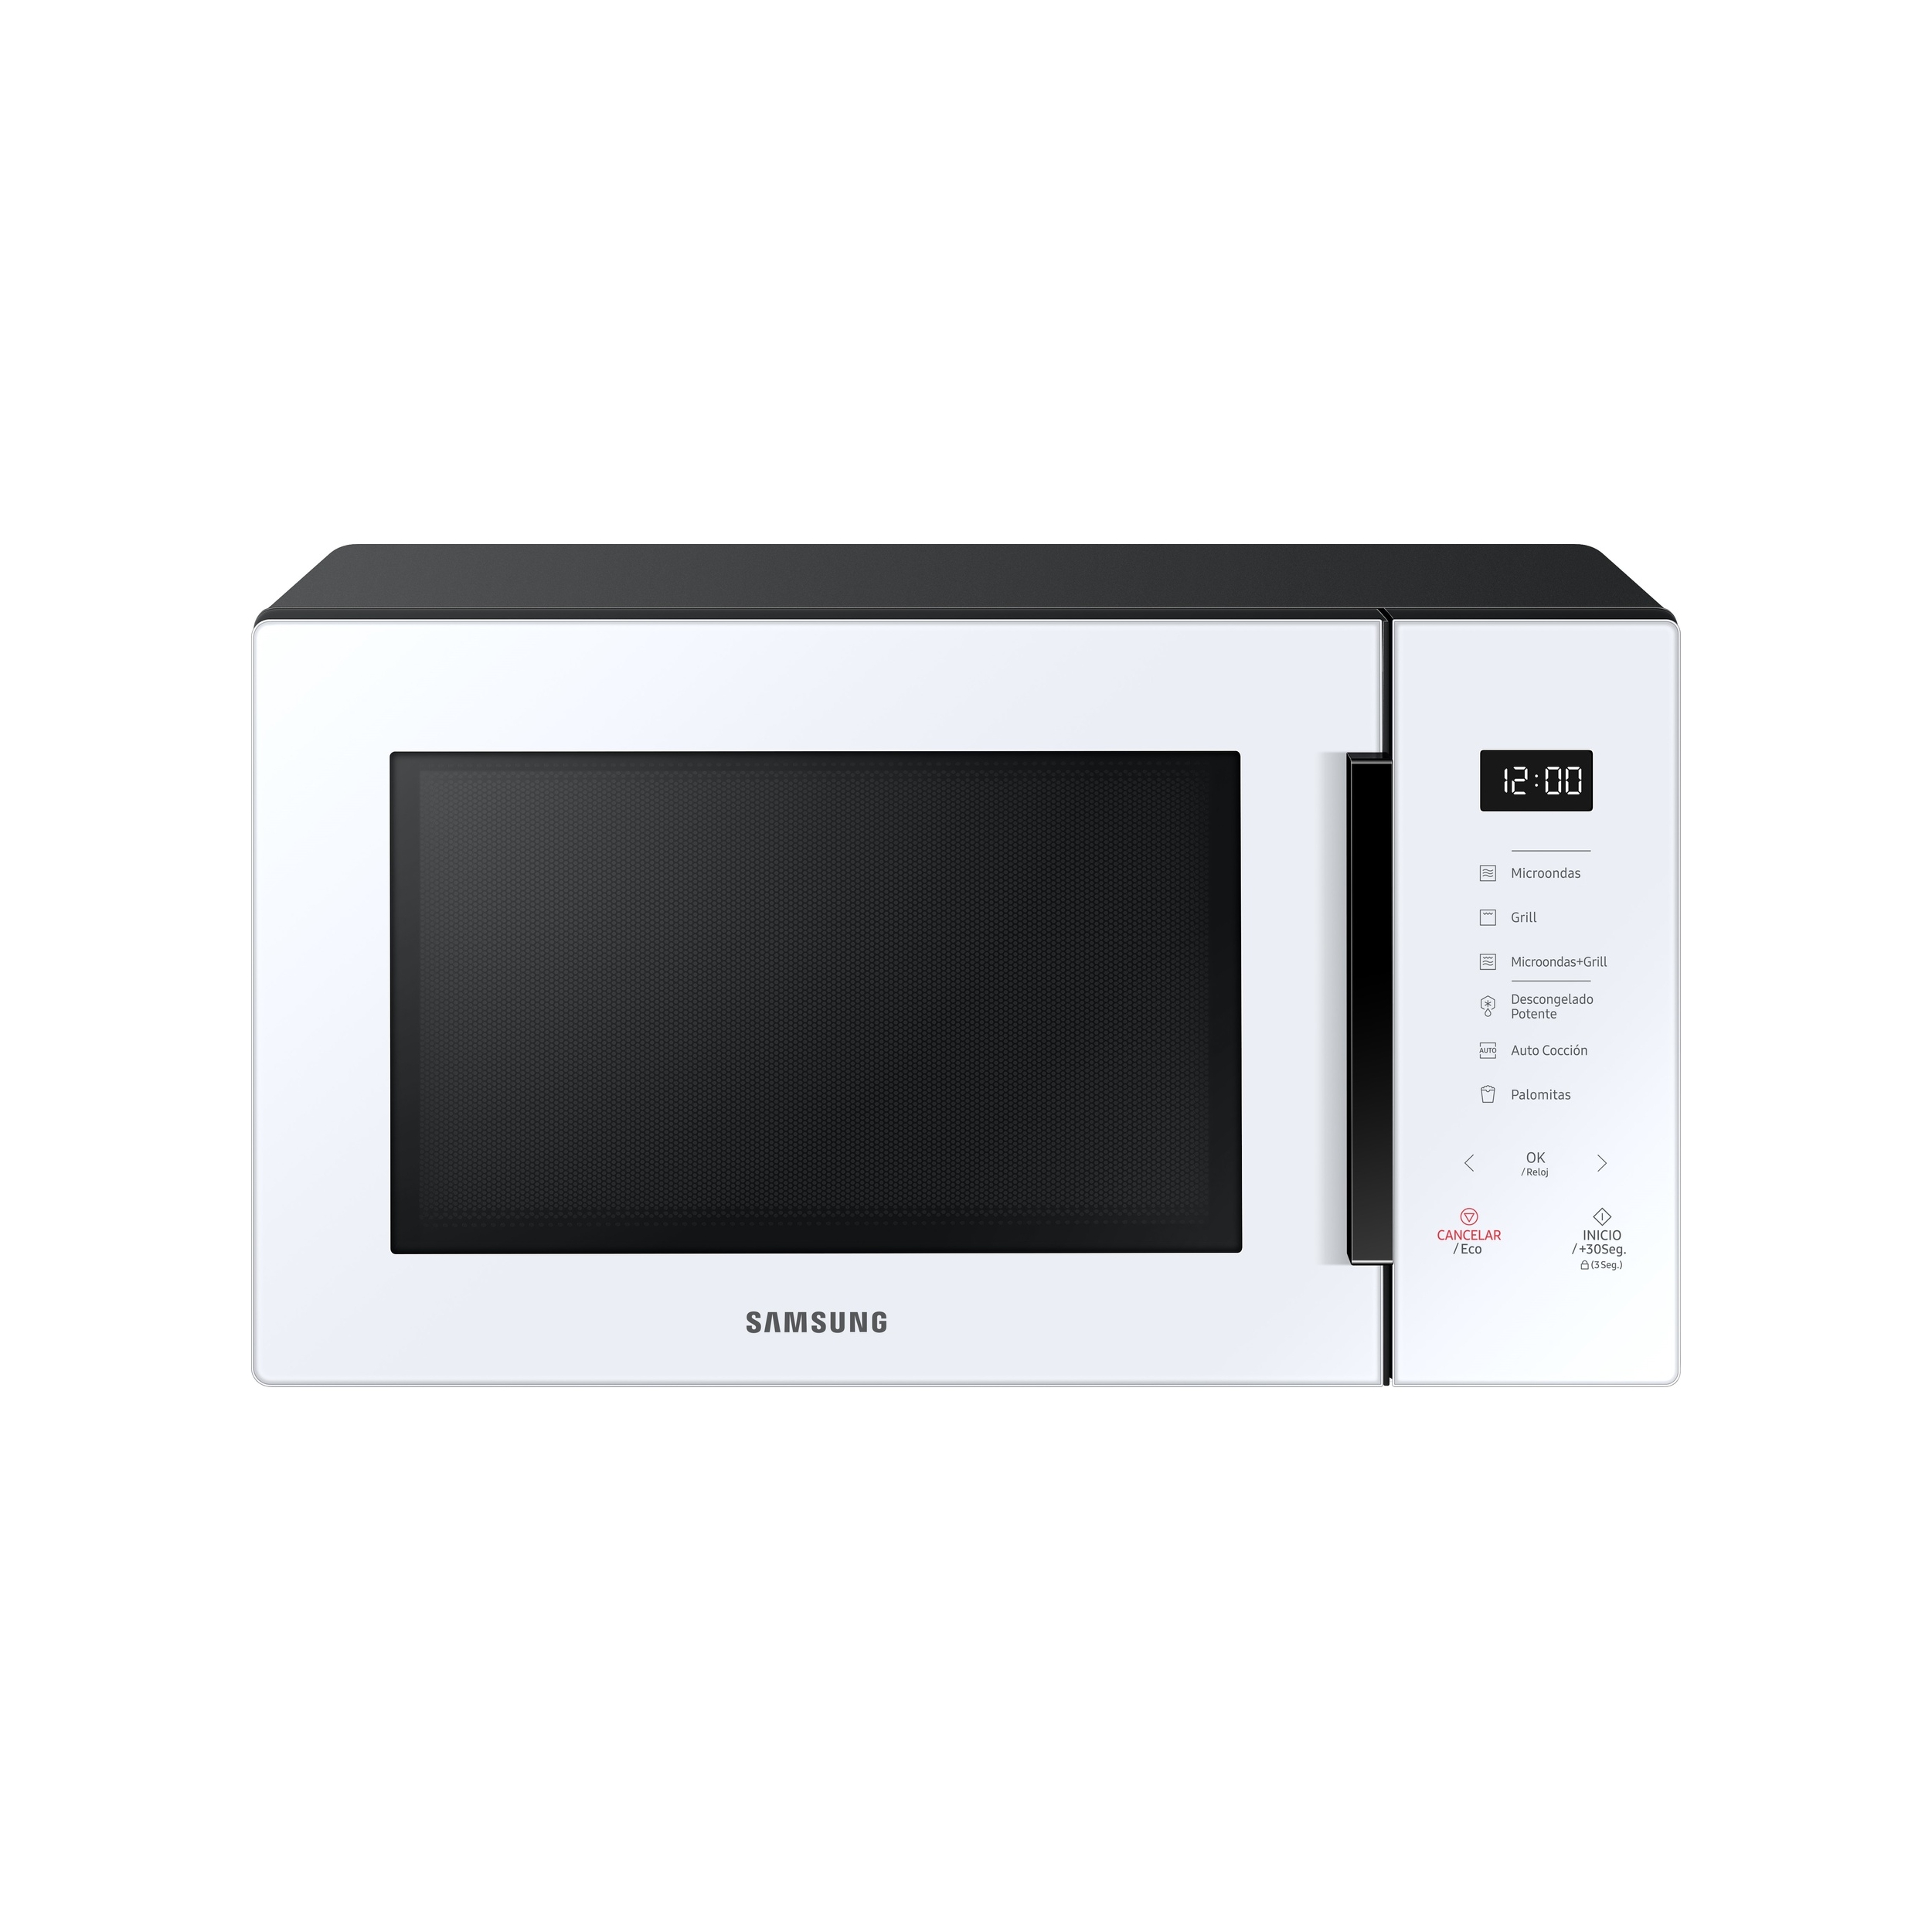 Samsung 30L Bespoke Grill Microwave Oven - White